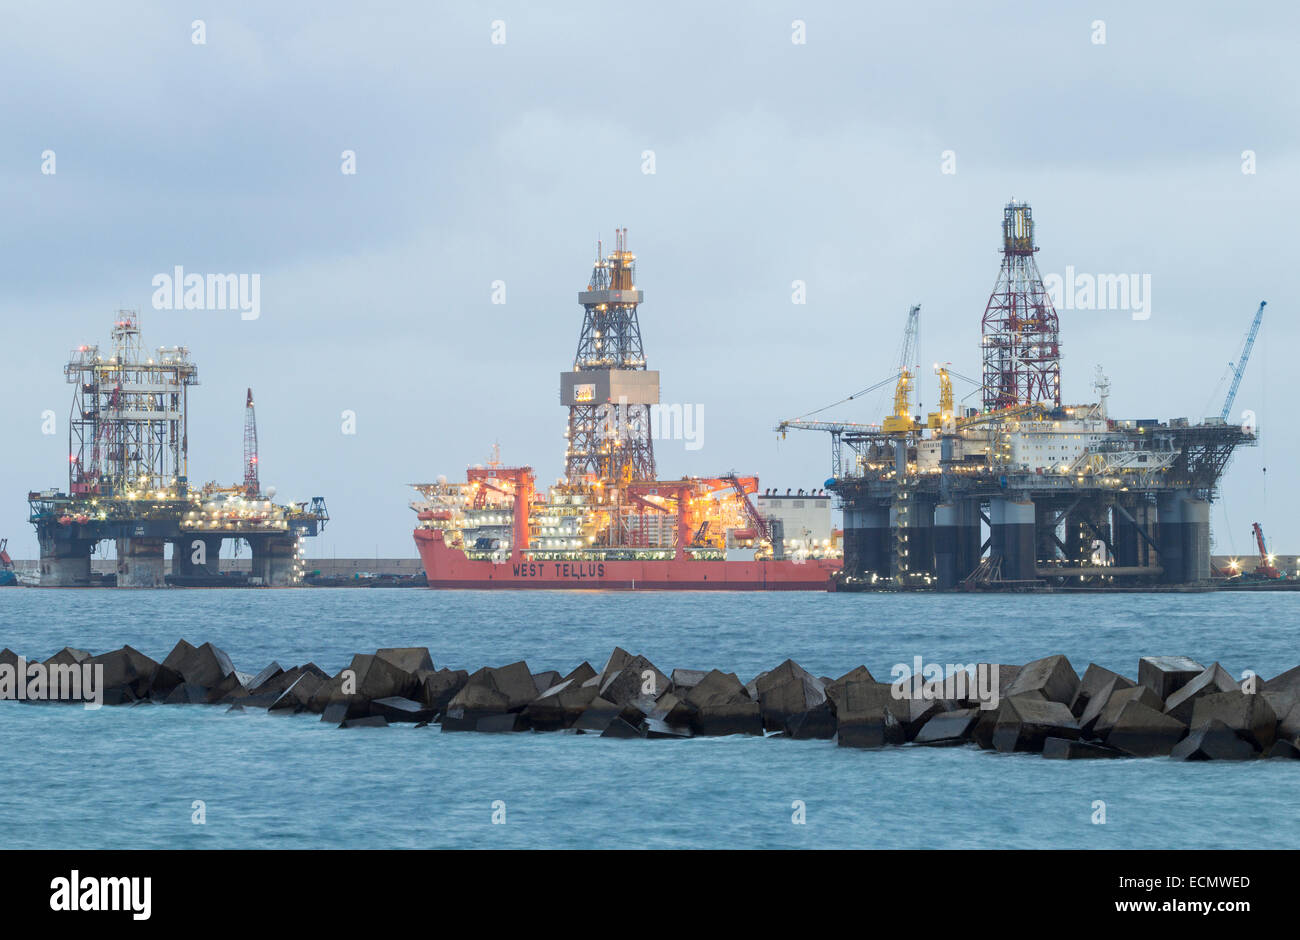 Las Palmas, Gran Canaria, Canary Islands, Spain. 17th December, 2014. Spanish Weather: Drilling platforms undergoing repairs in Las Palmas port on Gran Canaria as oil prices continue to fall. Stock Photo